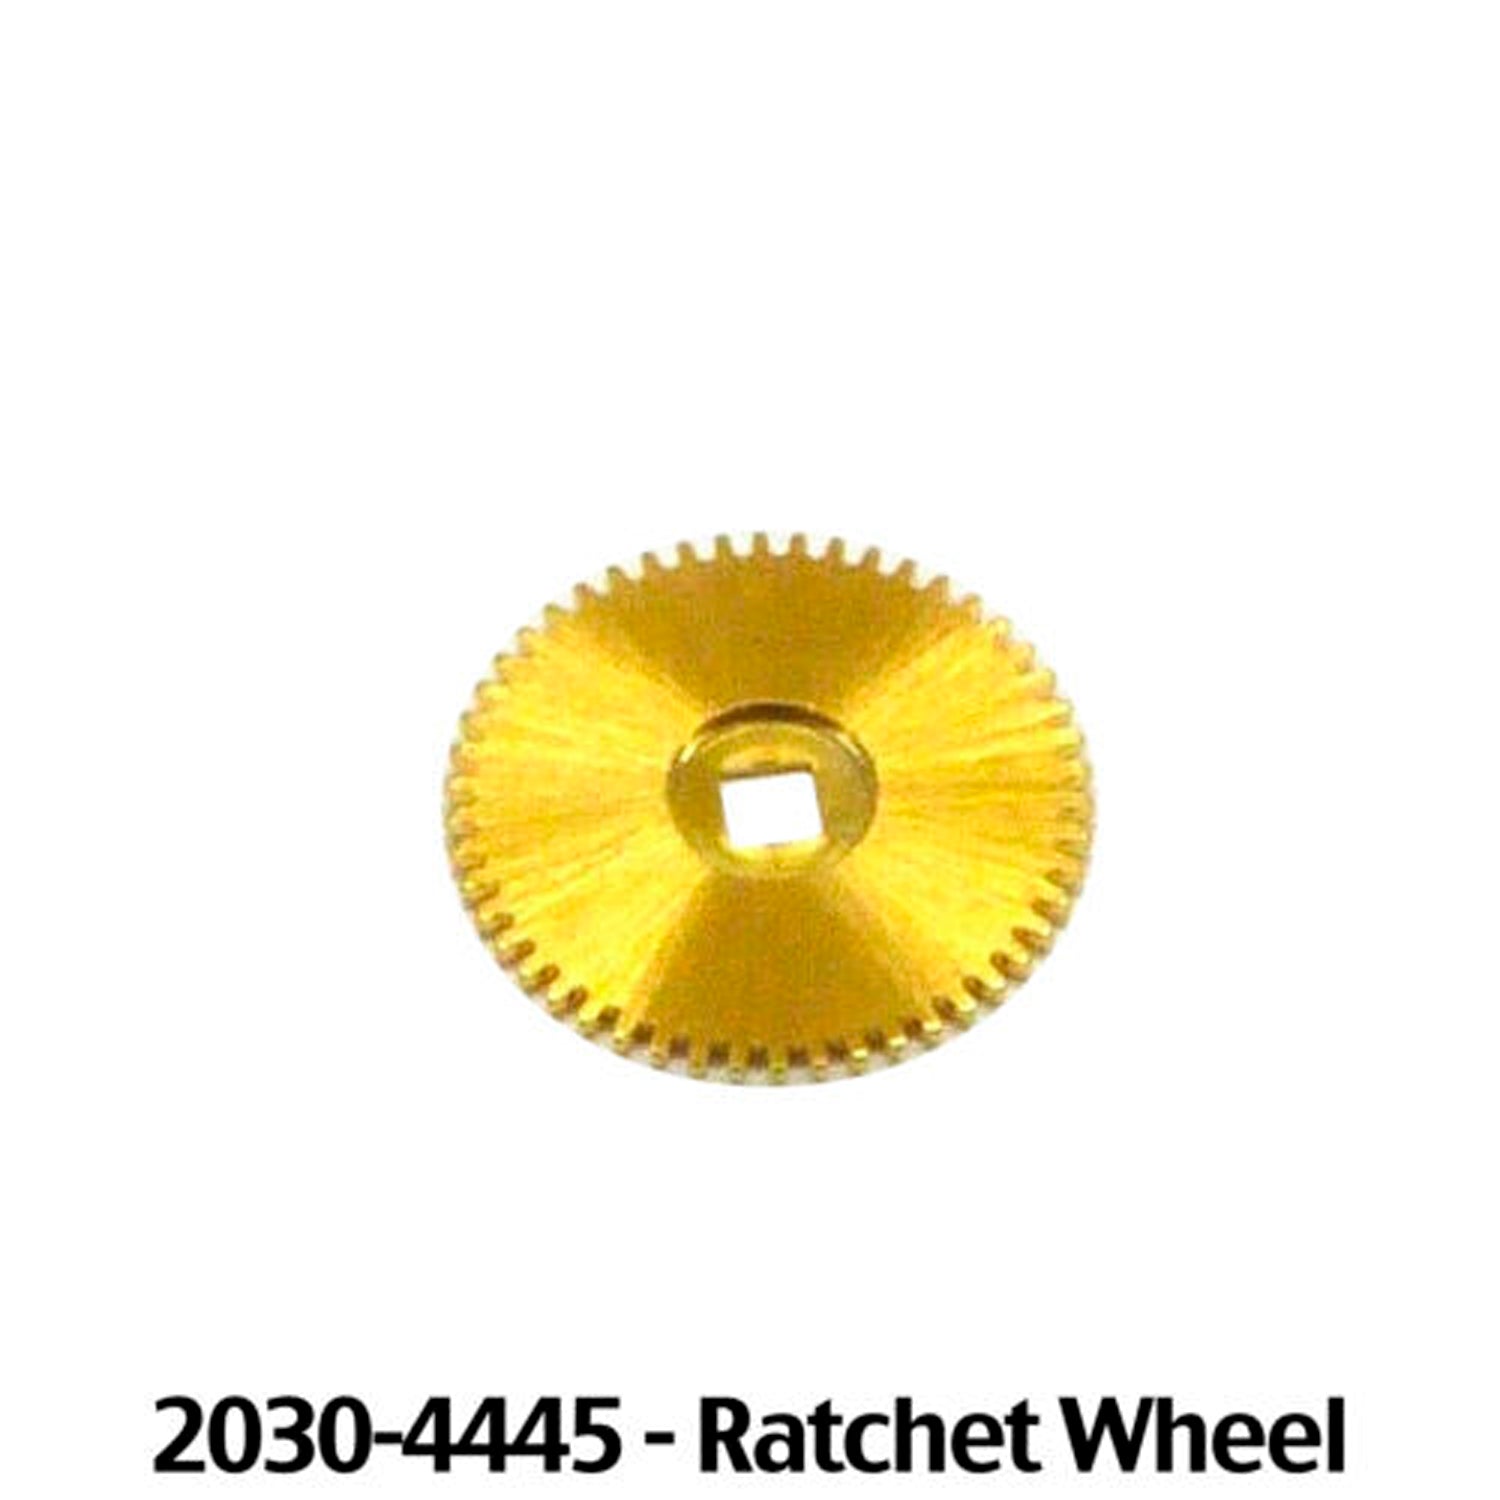 Internal Parts to fit Rolex 20 Series Calibers 2030, 2035